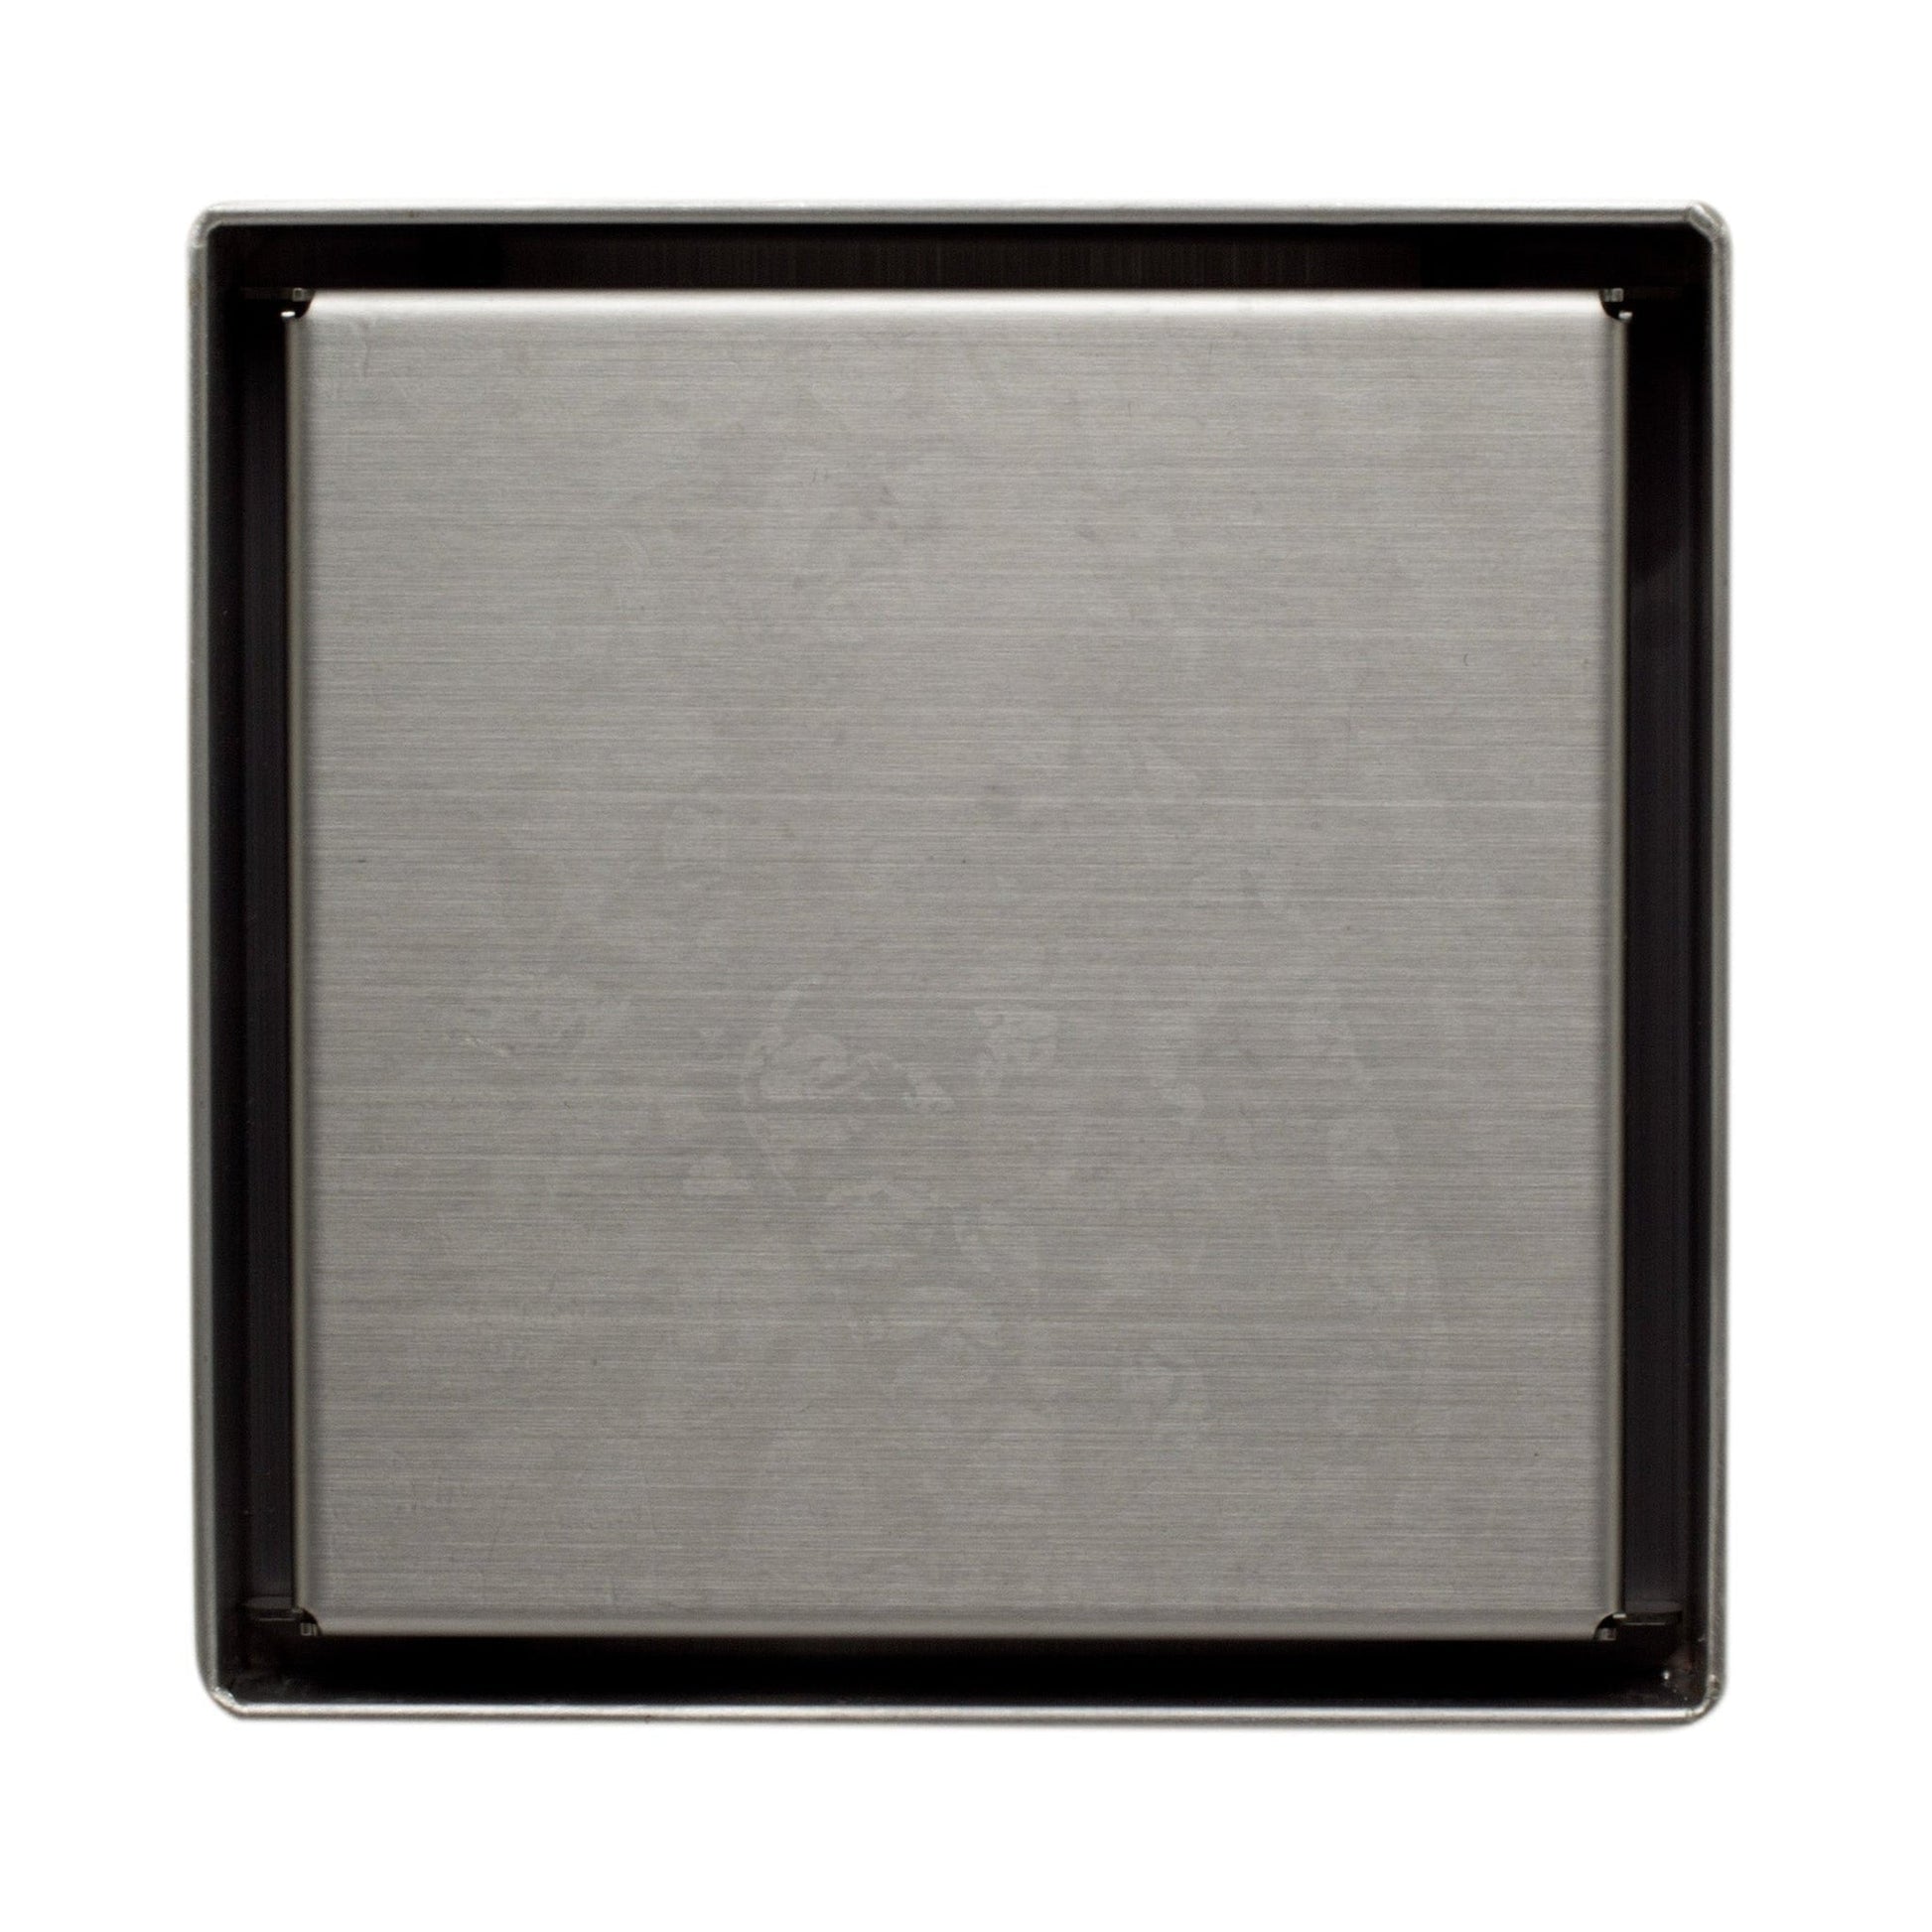 ALFI Brand ABSD55B-BSS 5" Brushed Stainless Steel Square Shower Drain With Solid Cover